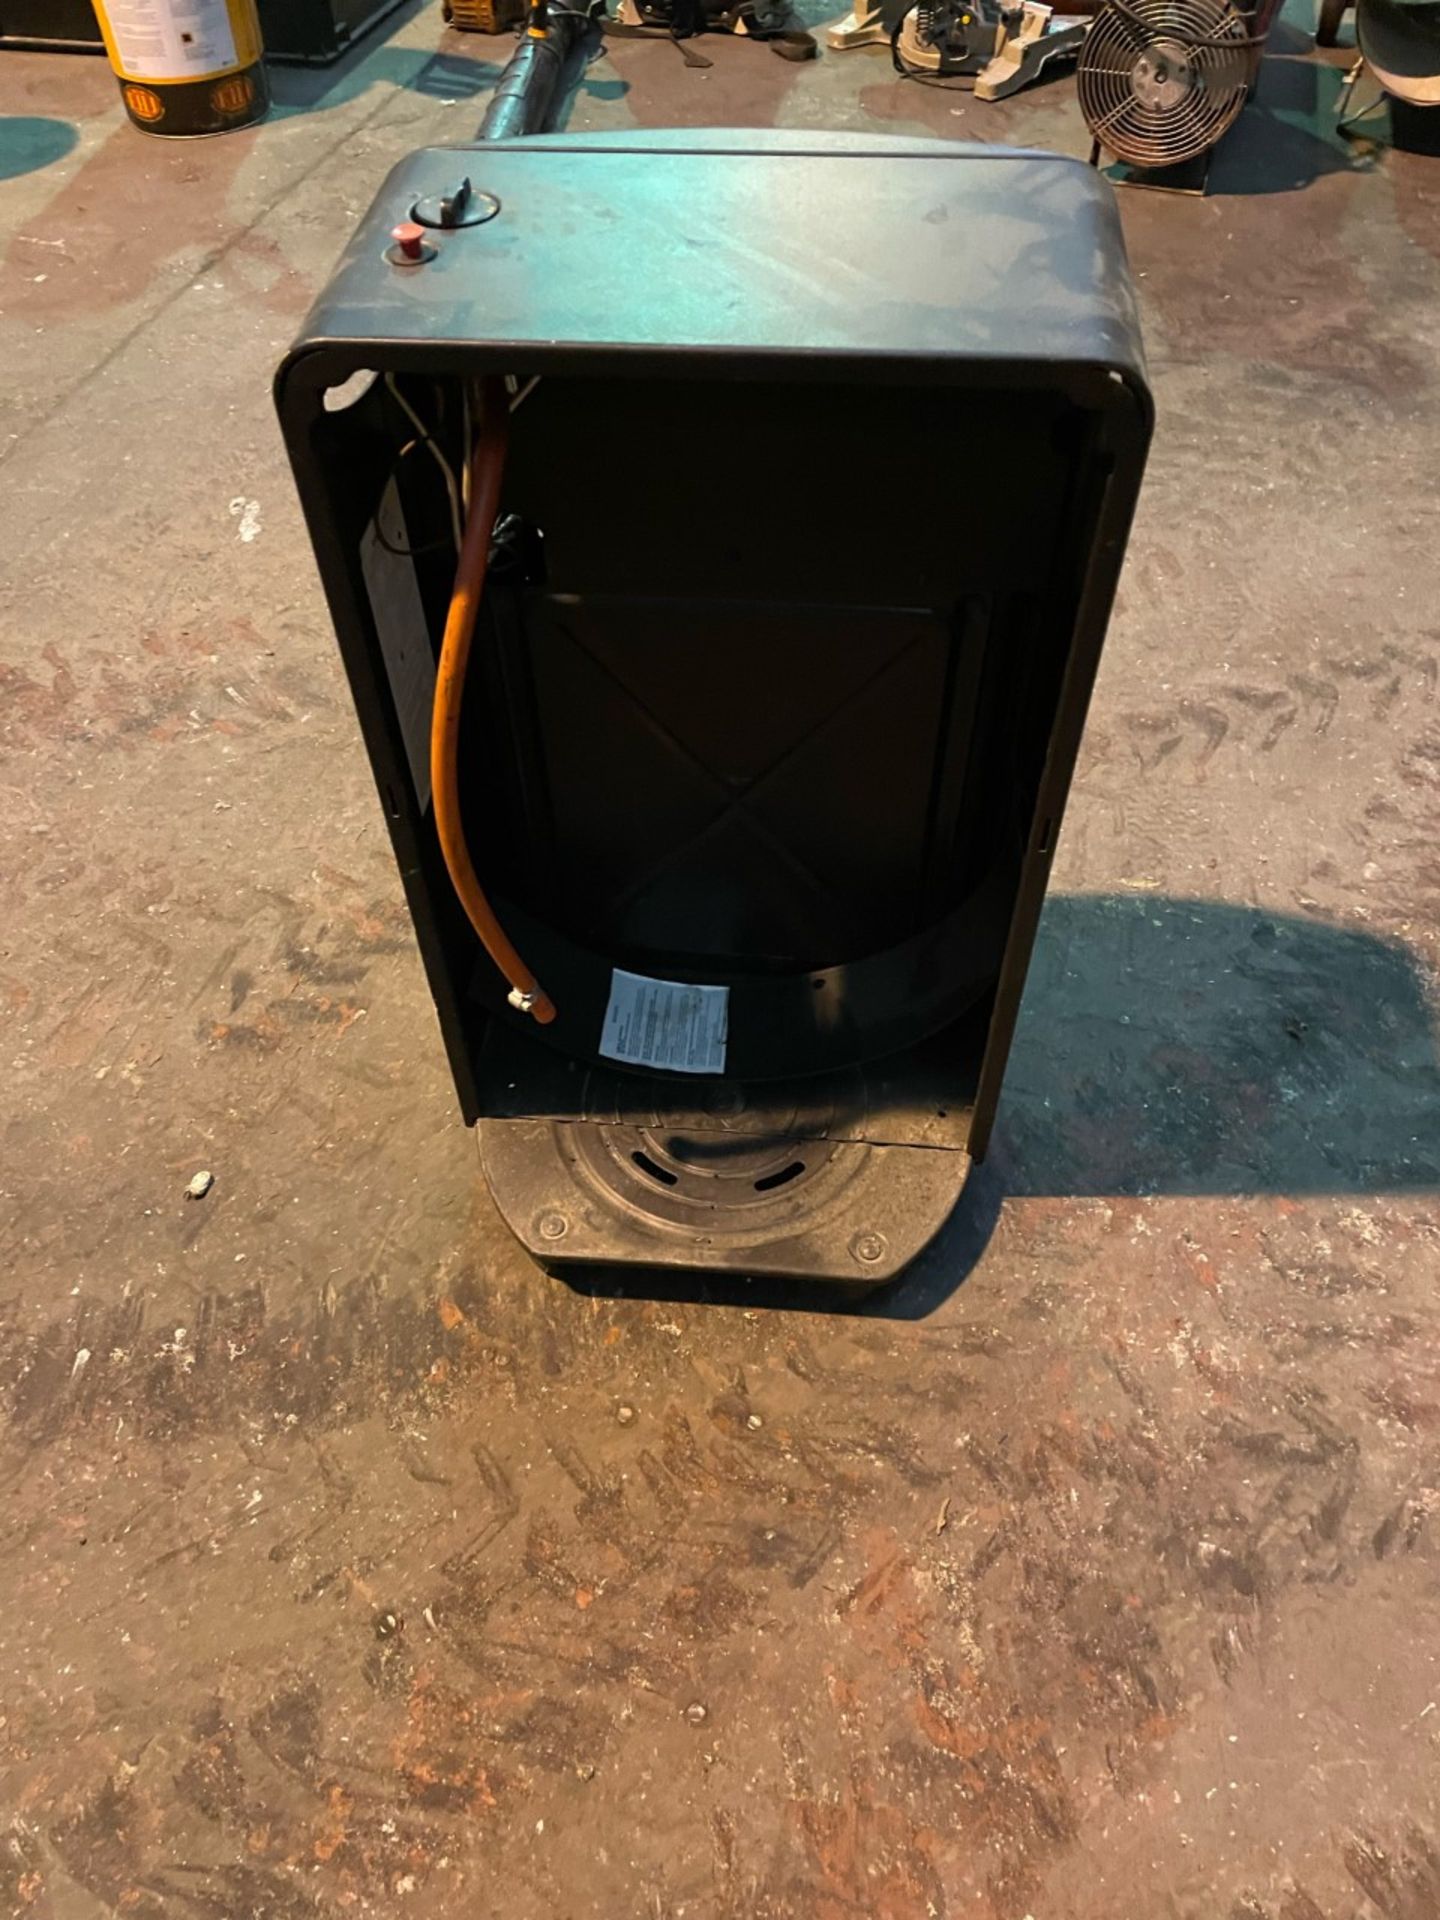 Heat line 4.2KW portable gas heater good working order - Image 2 of 2